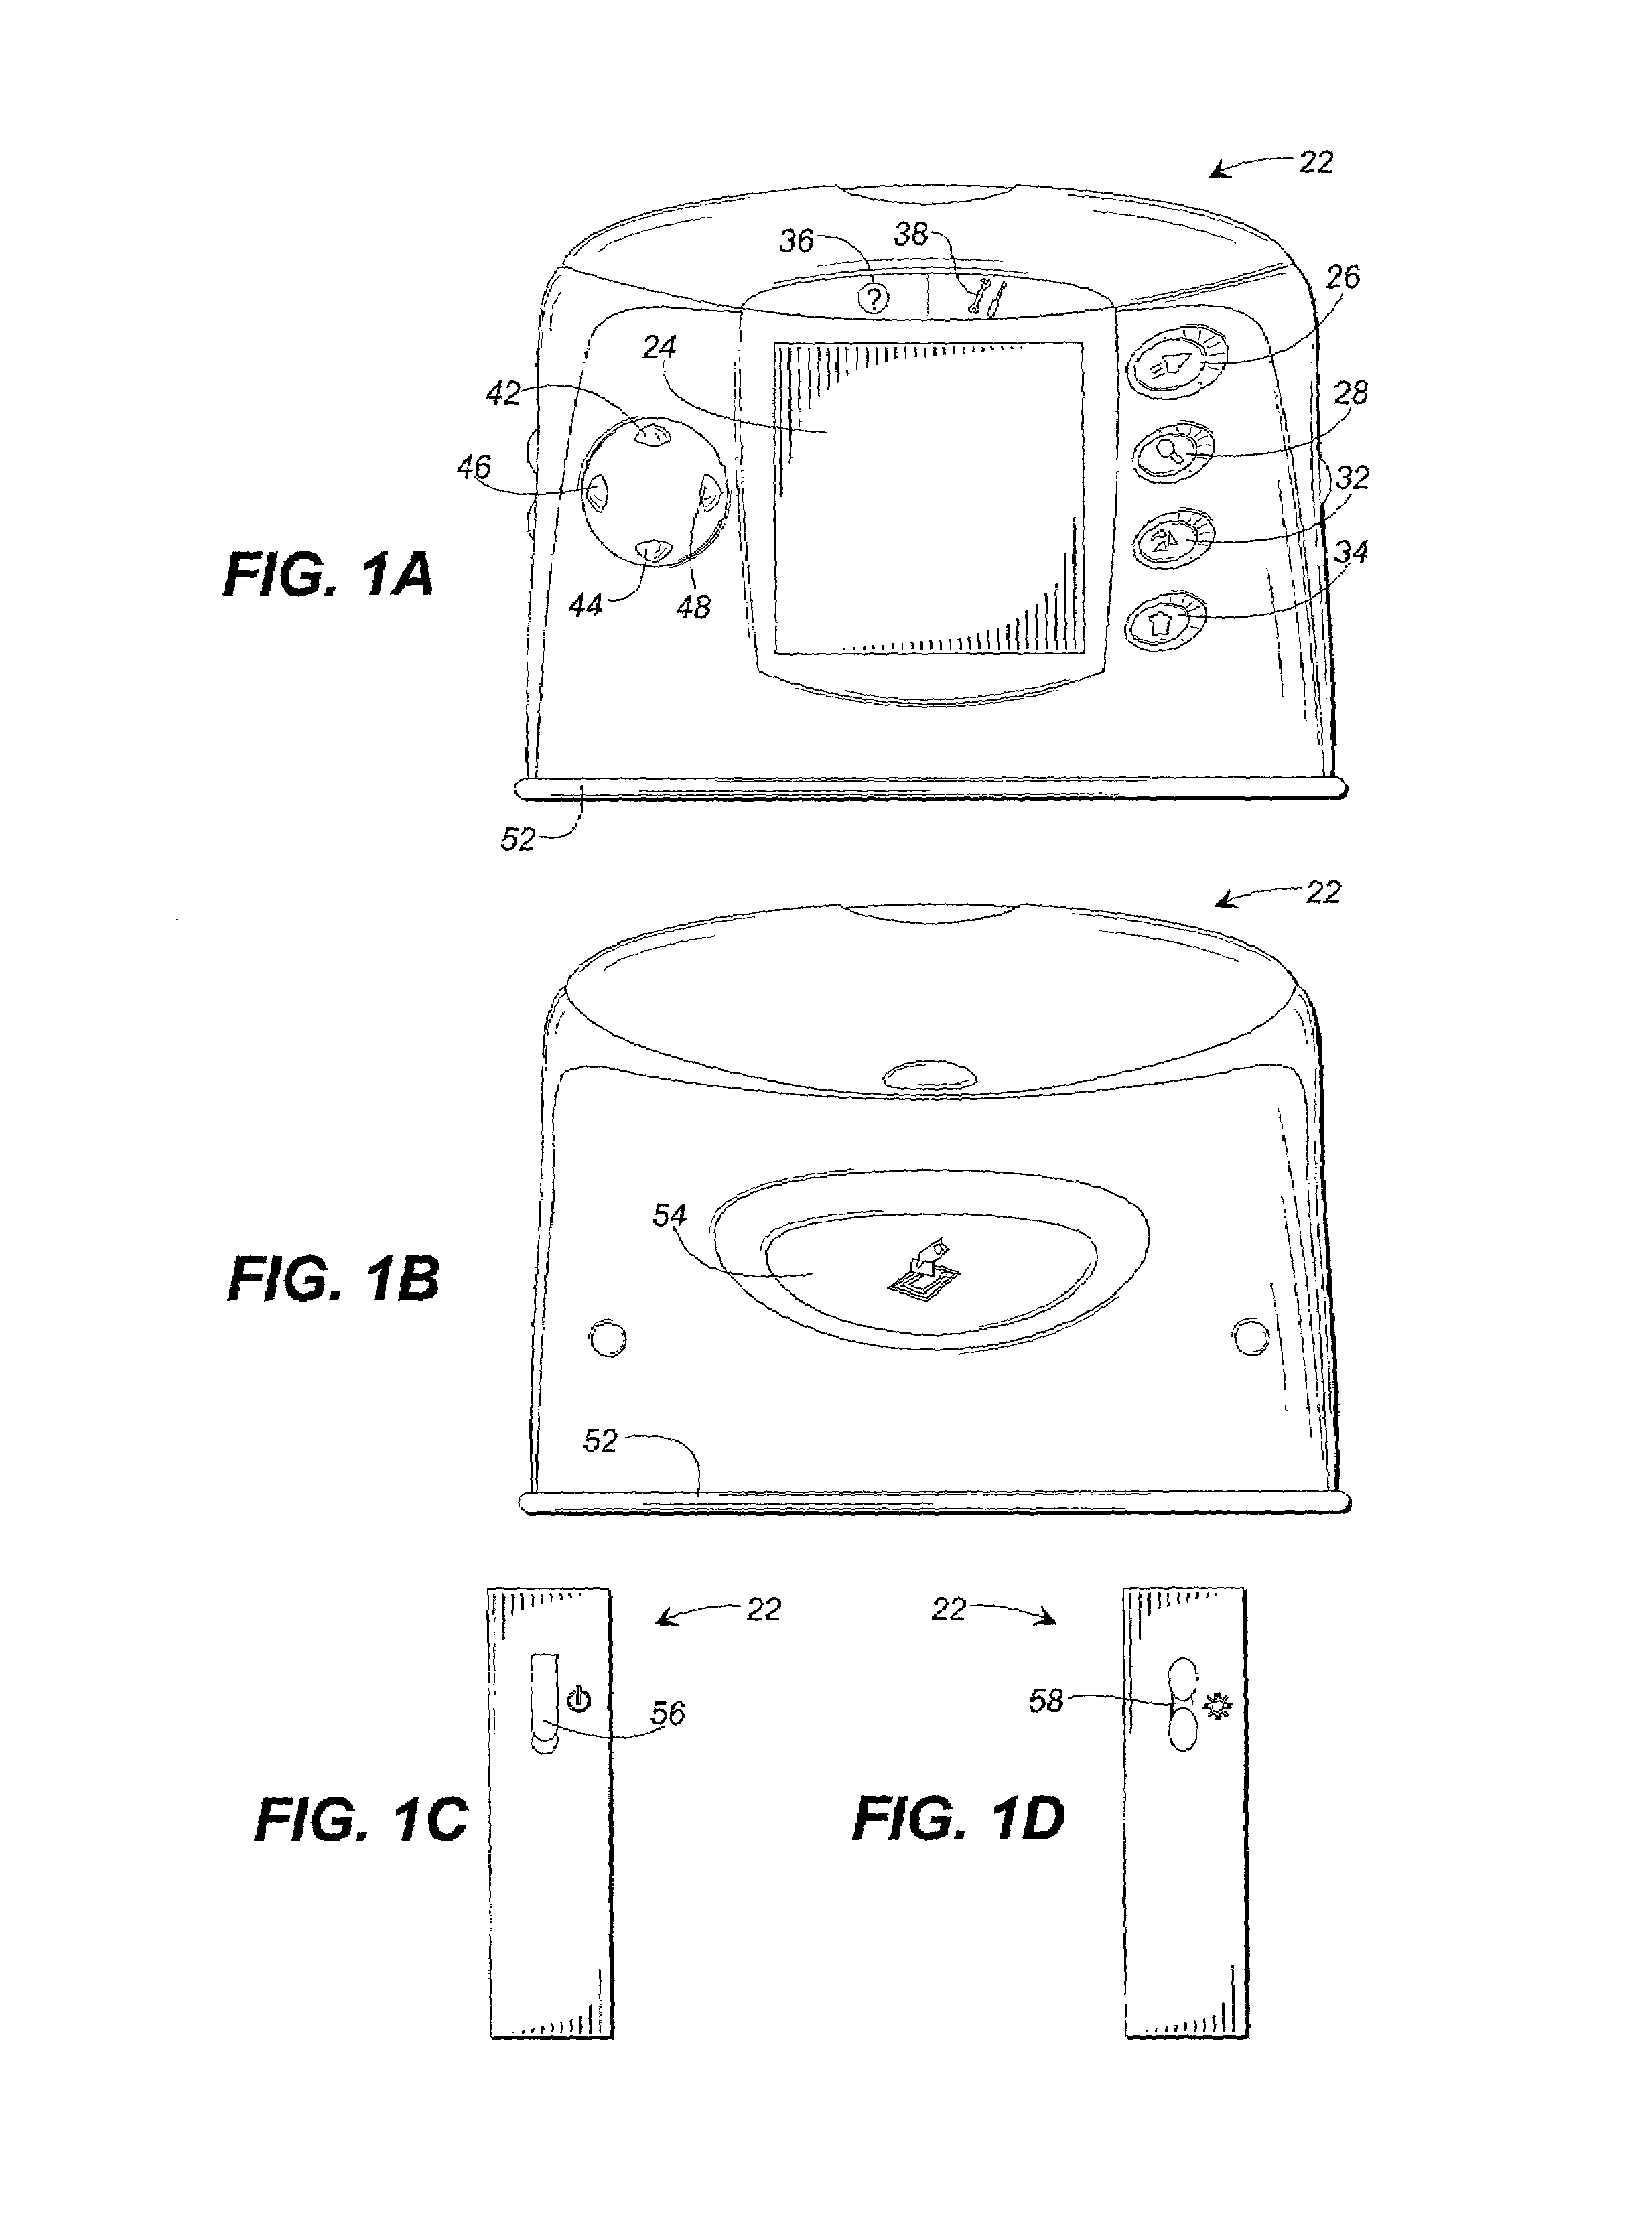 Appliance and method for capturing images having a user error interface